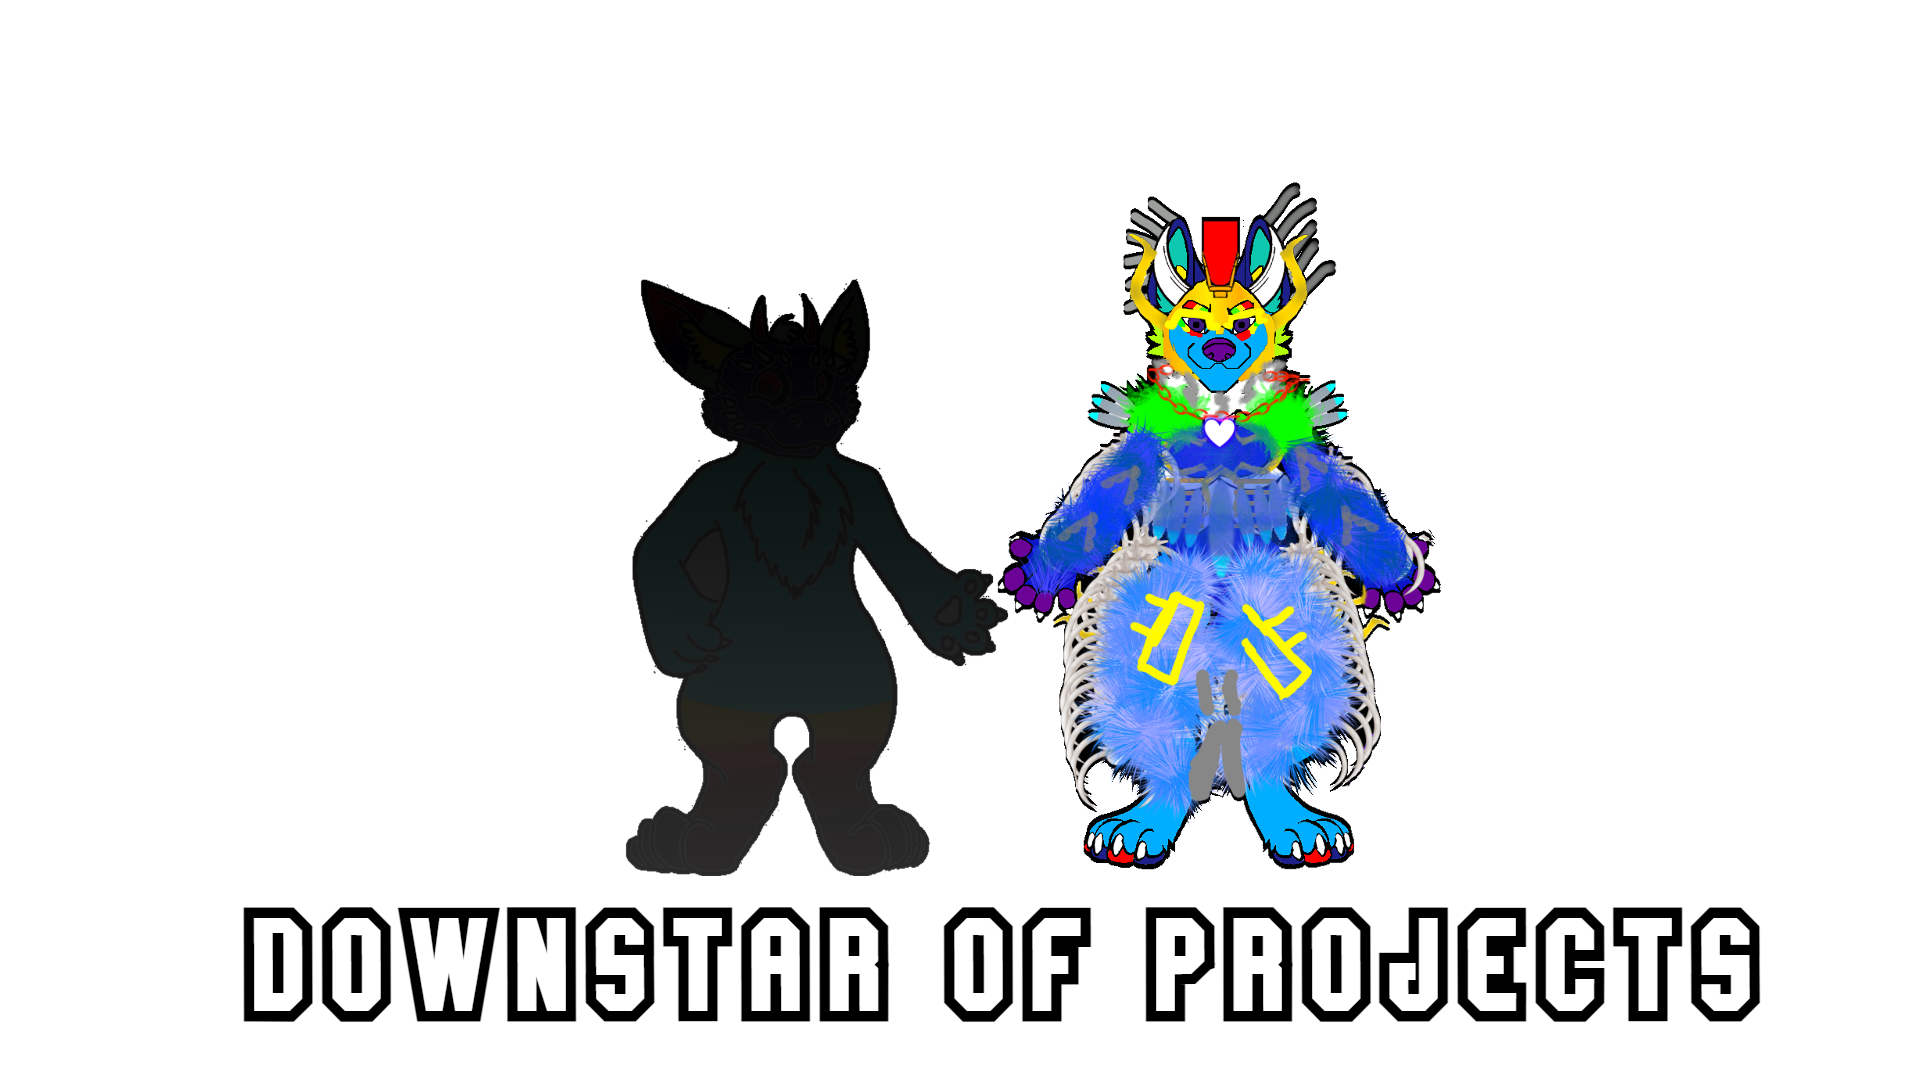 Downstar of projects